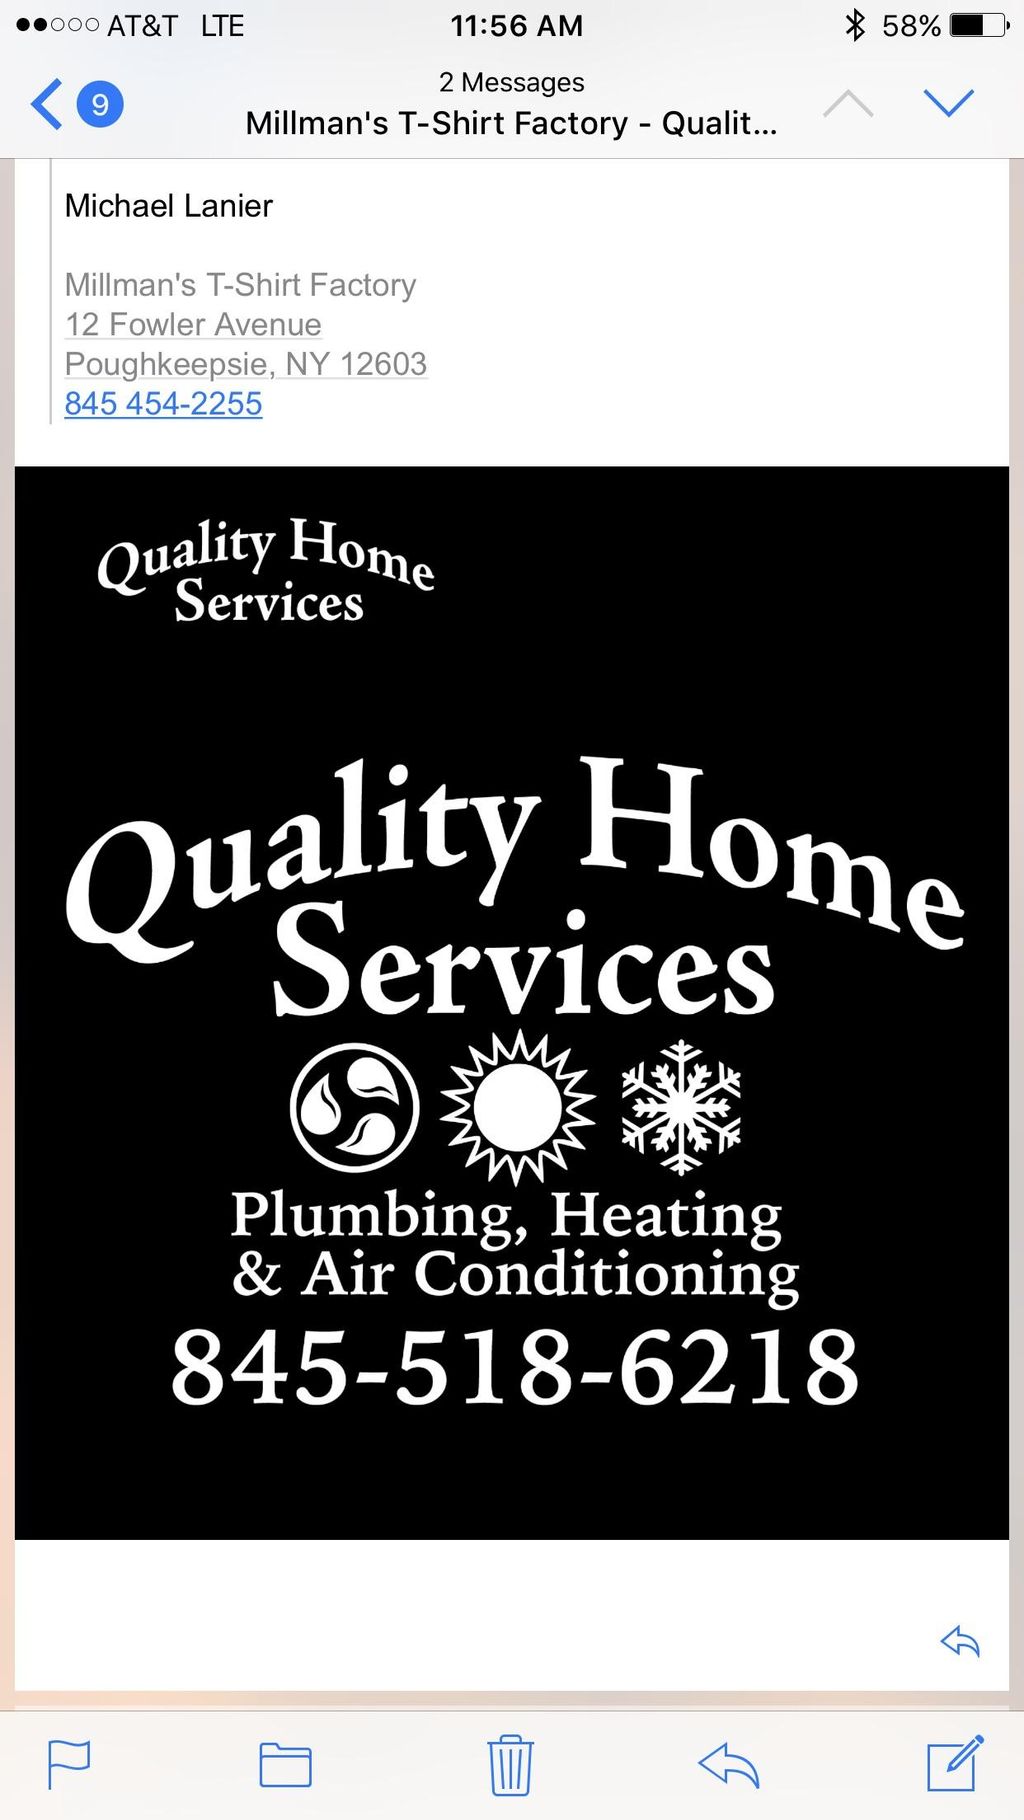 Quality Home Services